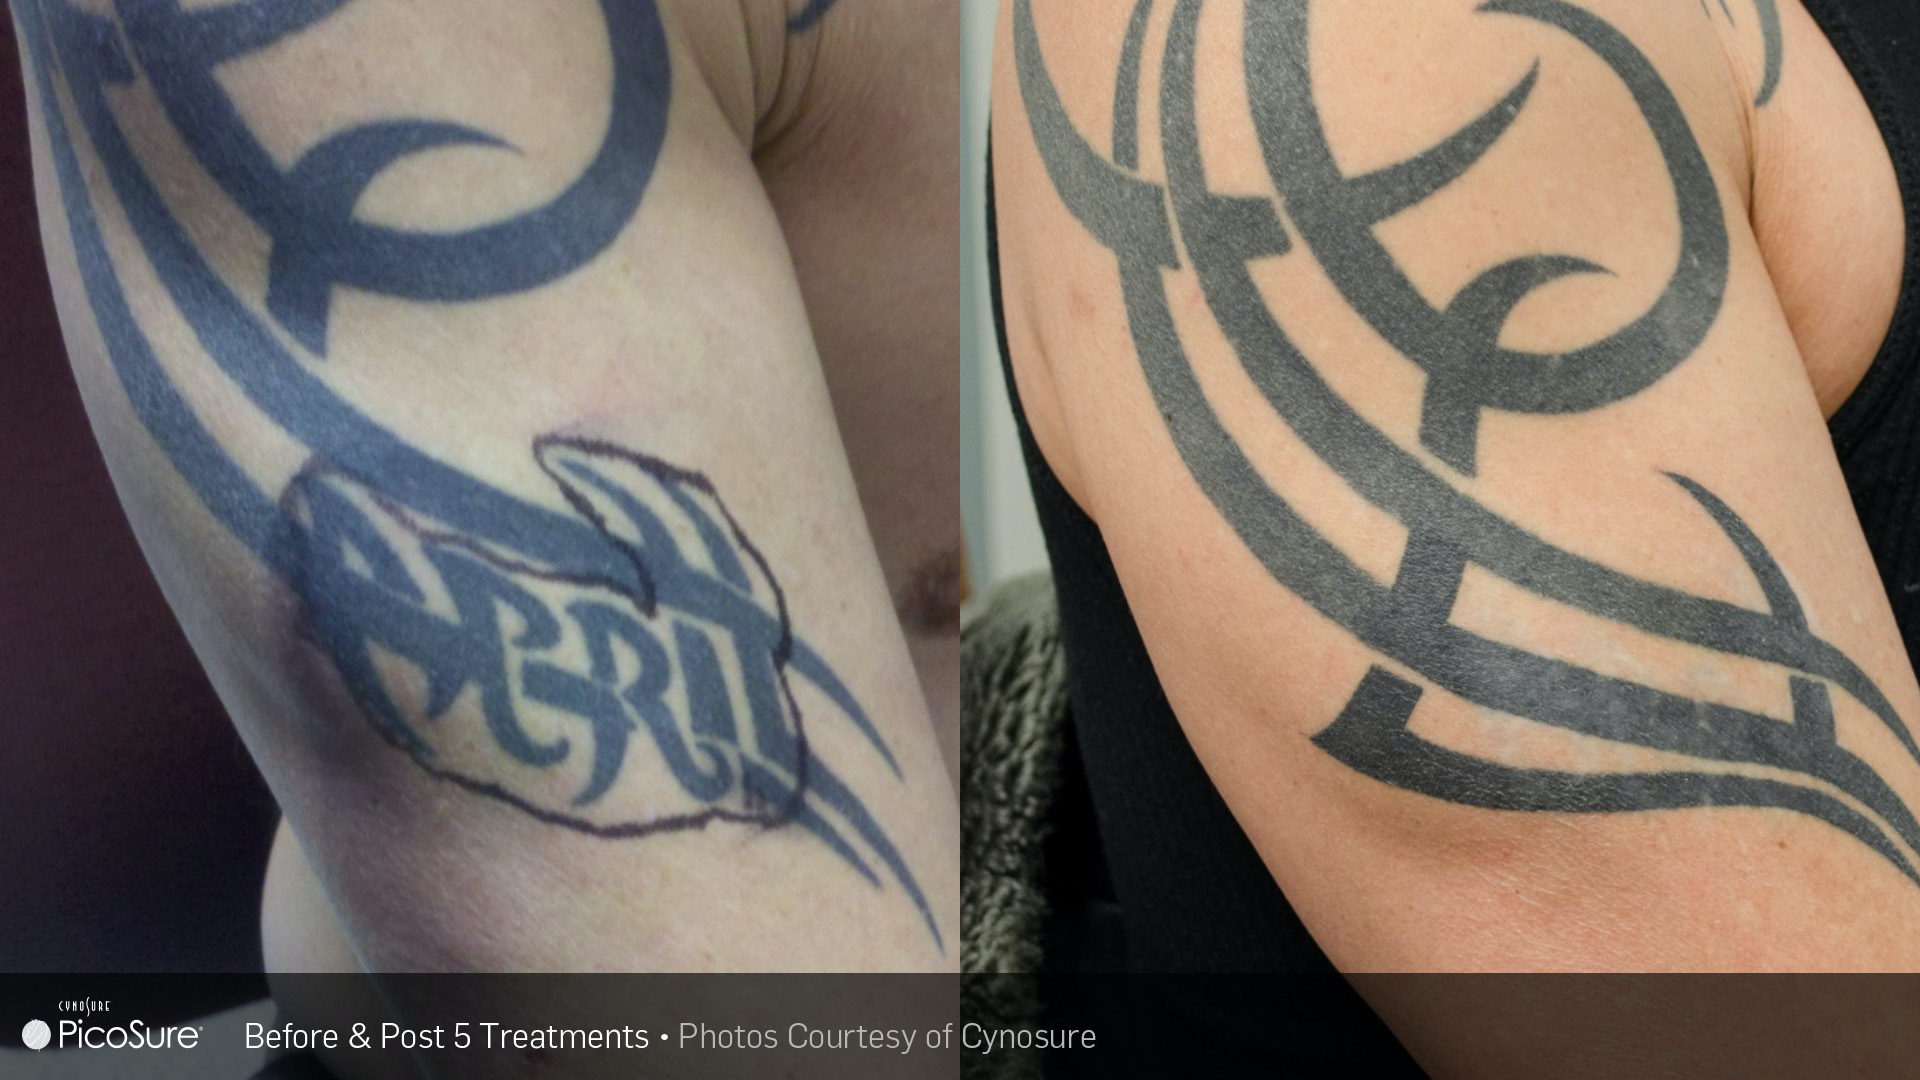 Tattoo Removal - Before and After Images